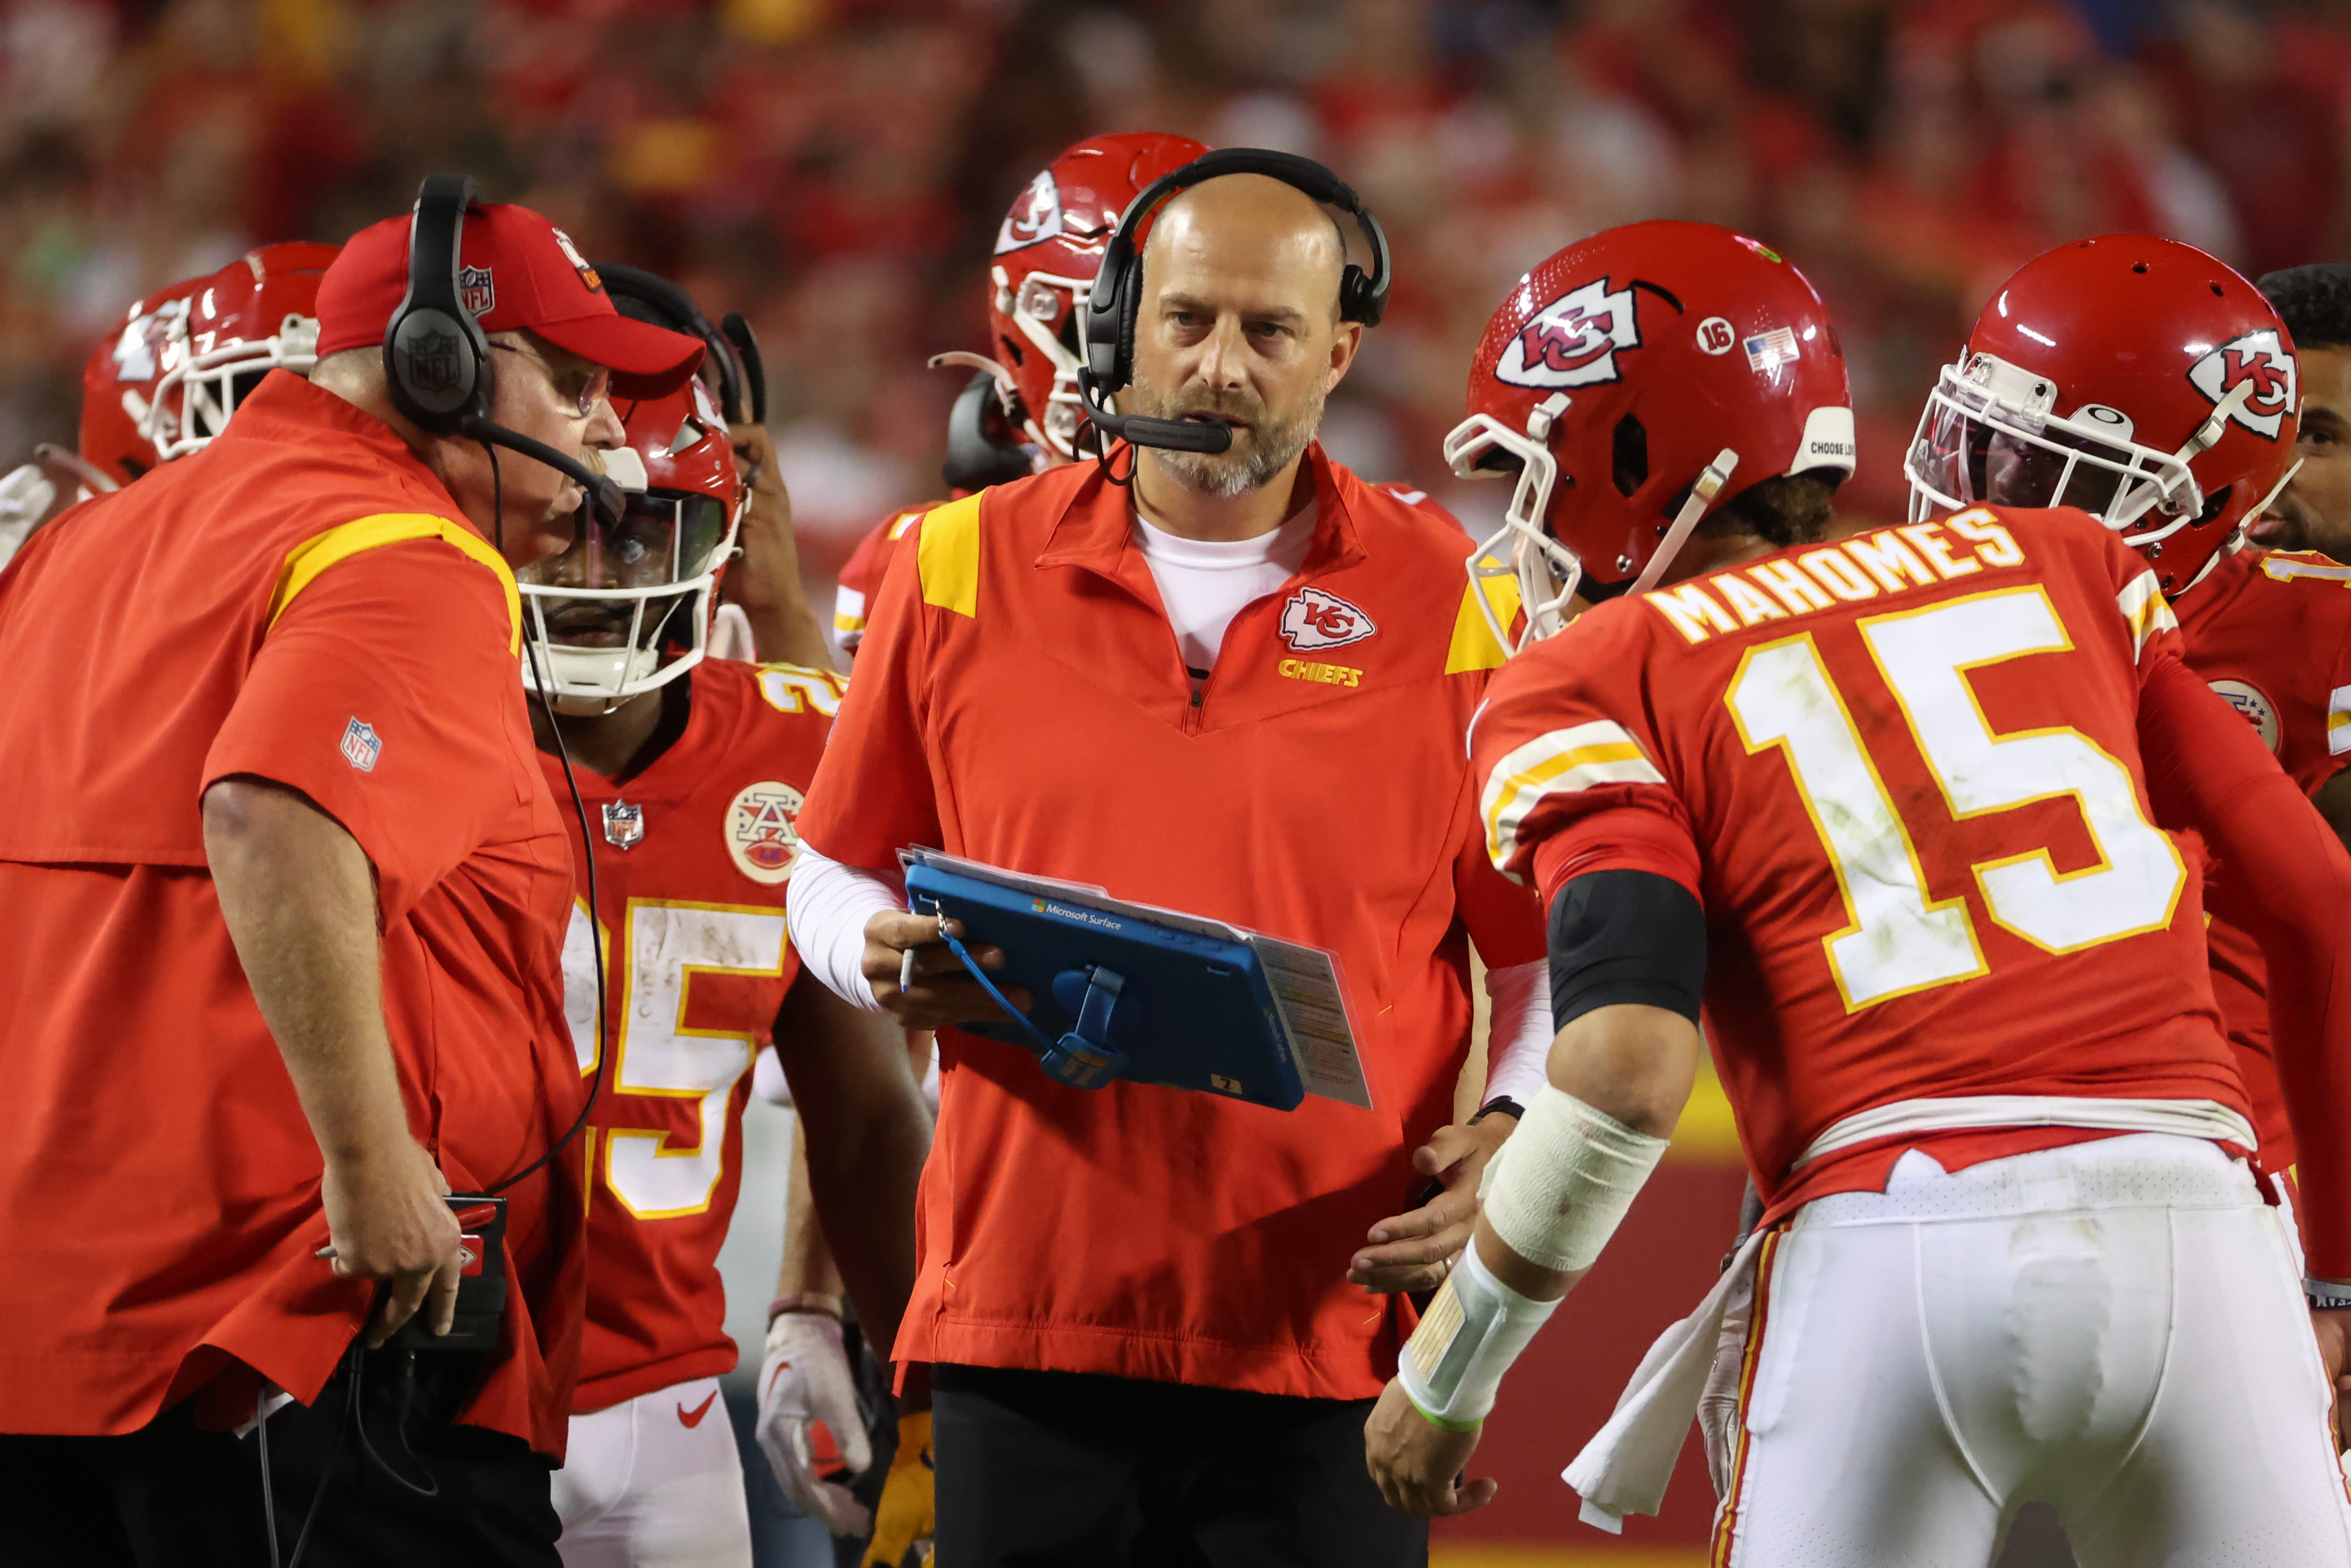 NFL Week 3 Odds: Chiefs are favored by 13 points against the Bears